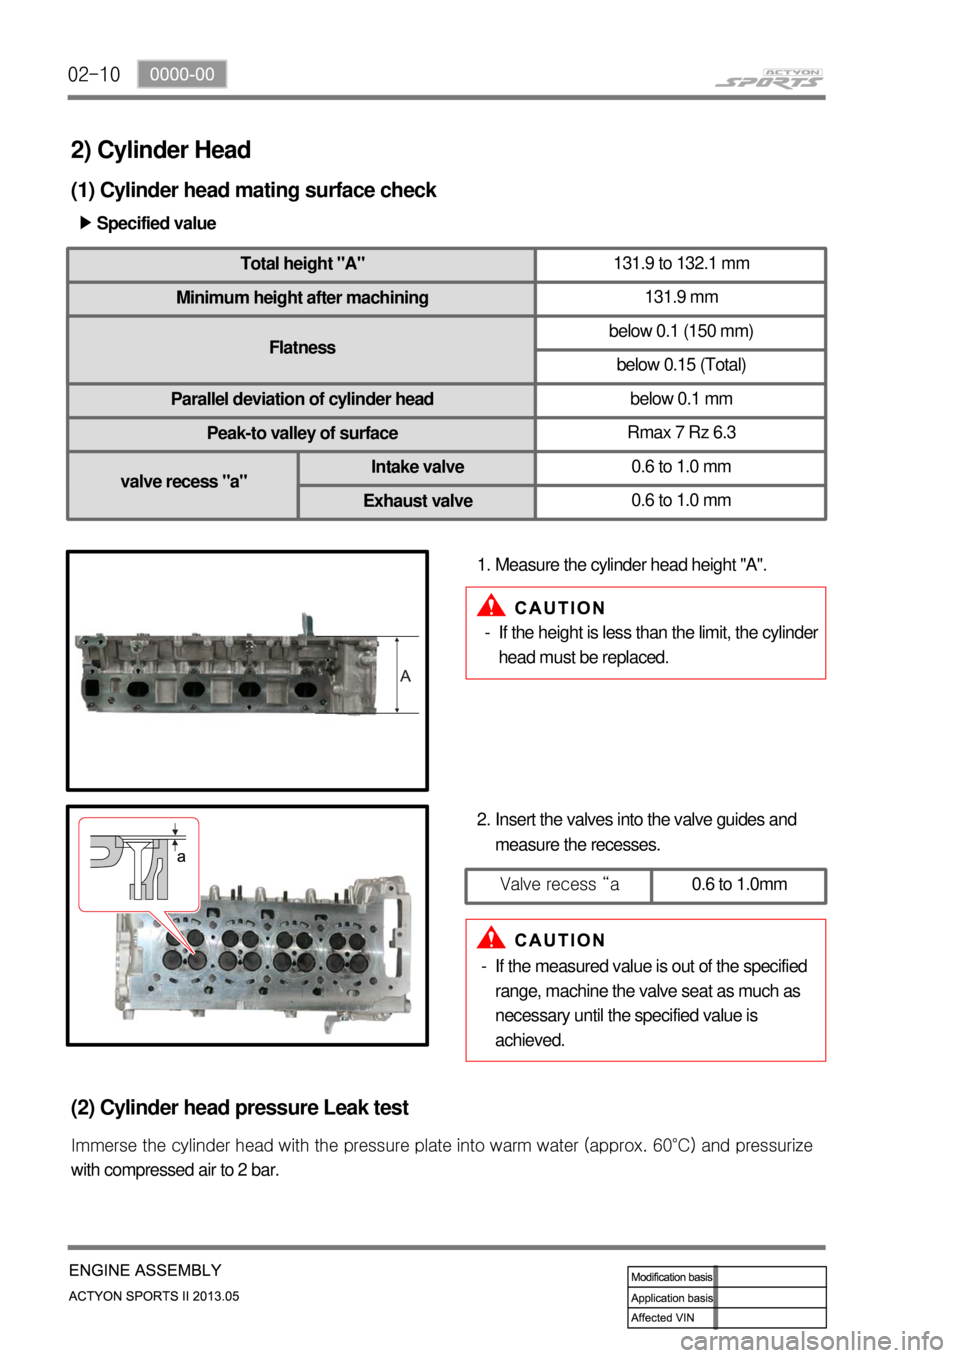 SSANGYONG NEW ACTYON SPORTS 2013 Workshop Manual 02-10
2) Cylinder Head
(1) Cylinder head mating surface check
Specified value
▶
Total height "A" 131.9 to 132.1 mm
Minimum height after machining 131.9 mm
Flatness Longitudinal direction
below 0.1 (